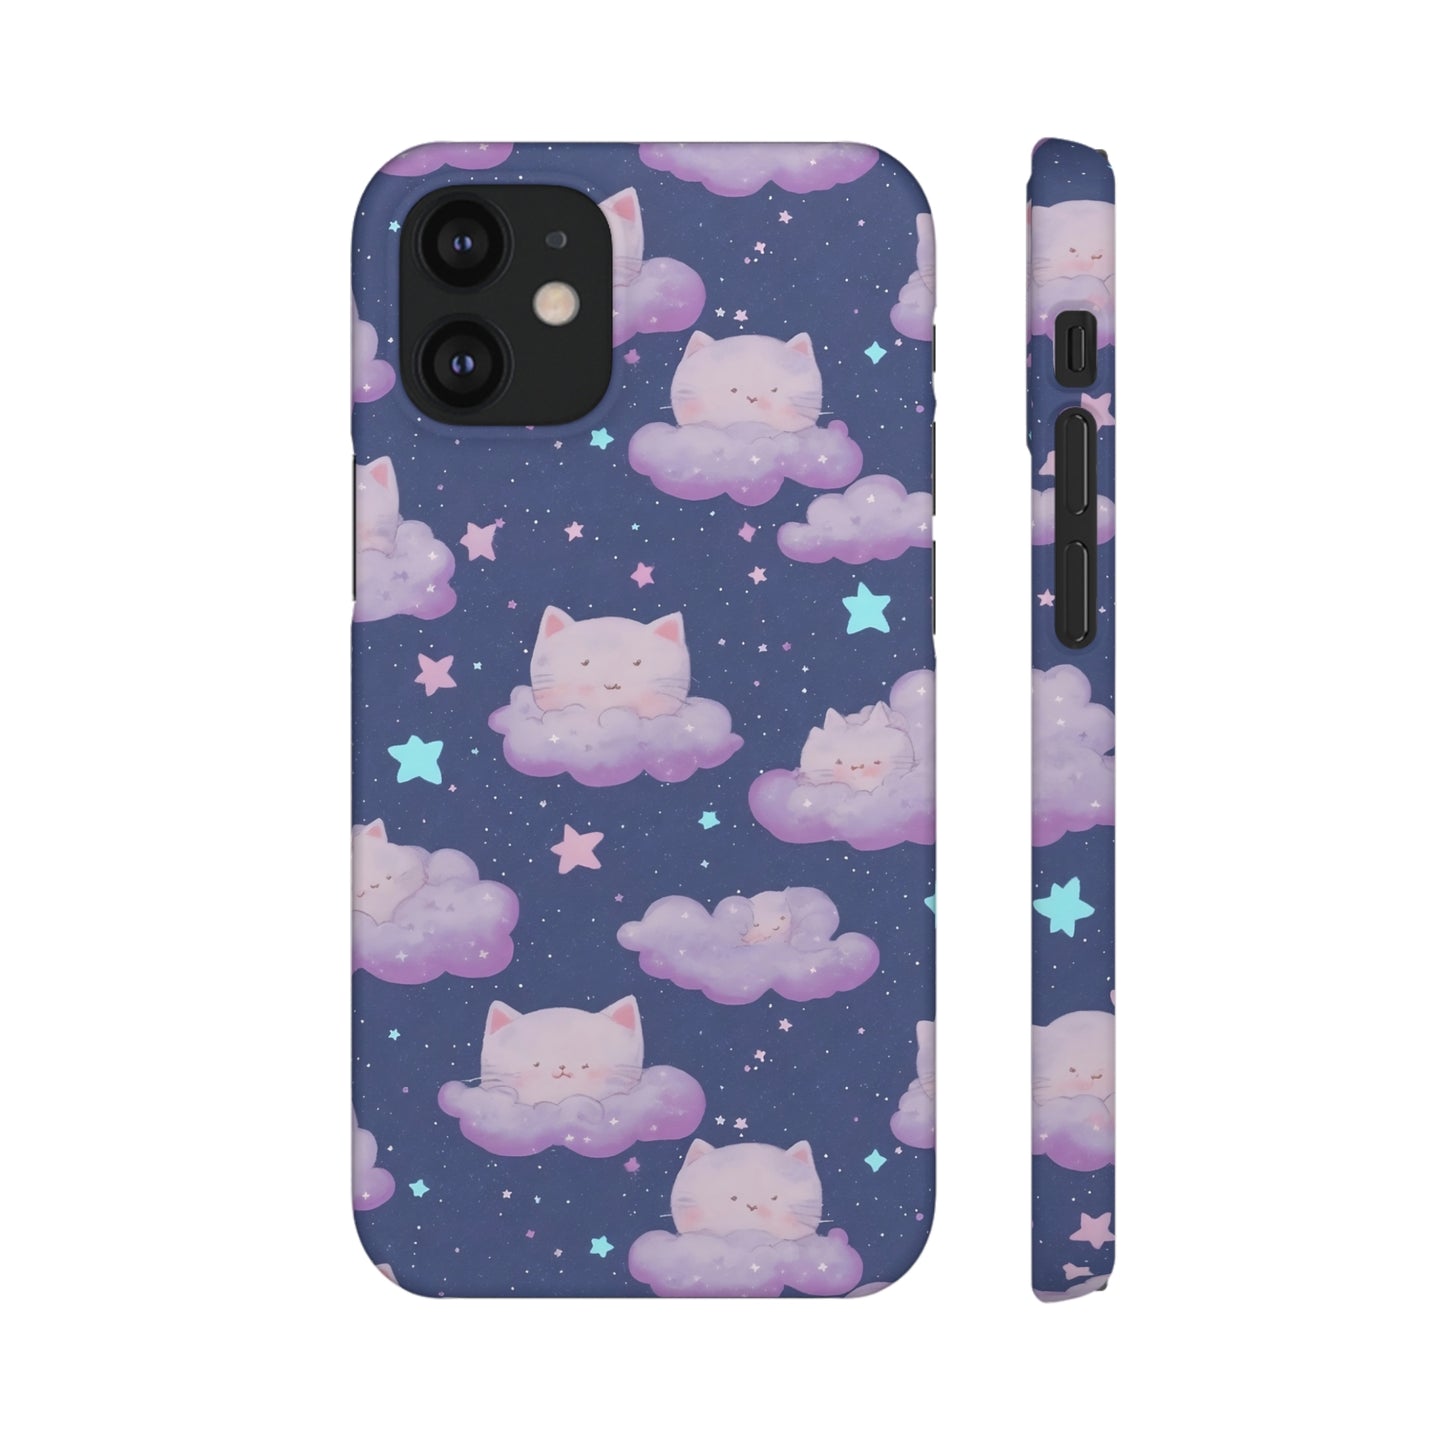 "Purrfect Paradise Sky" iPhone Snap Cases